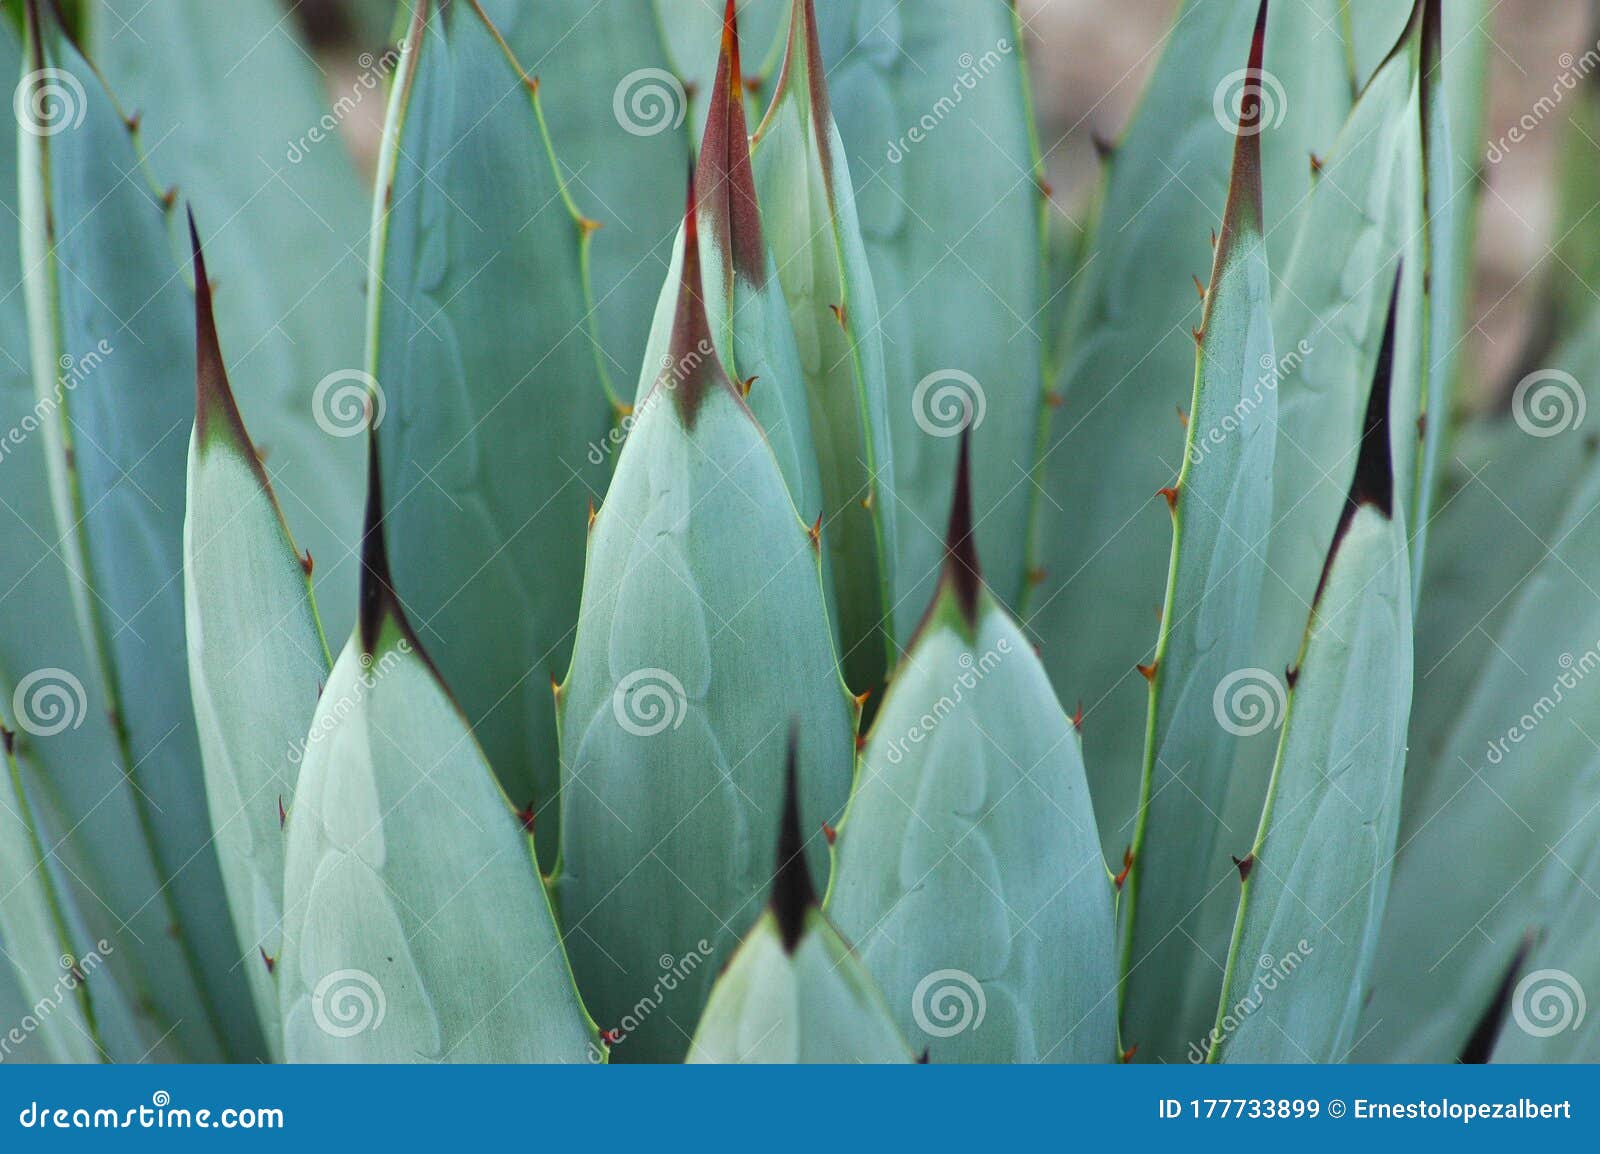 species of agave with its characteristic green leaves and thorns